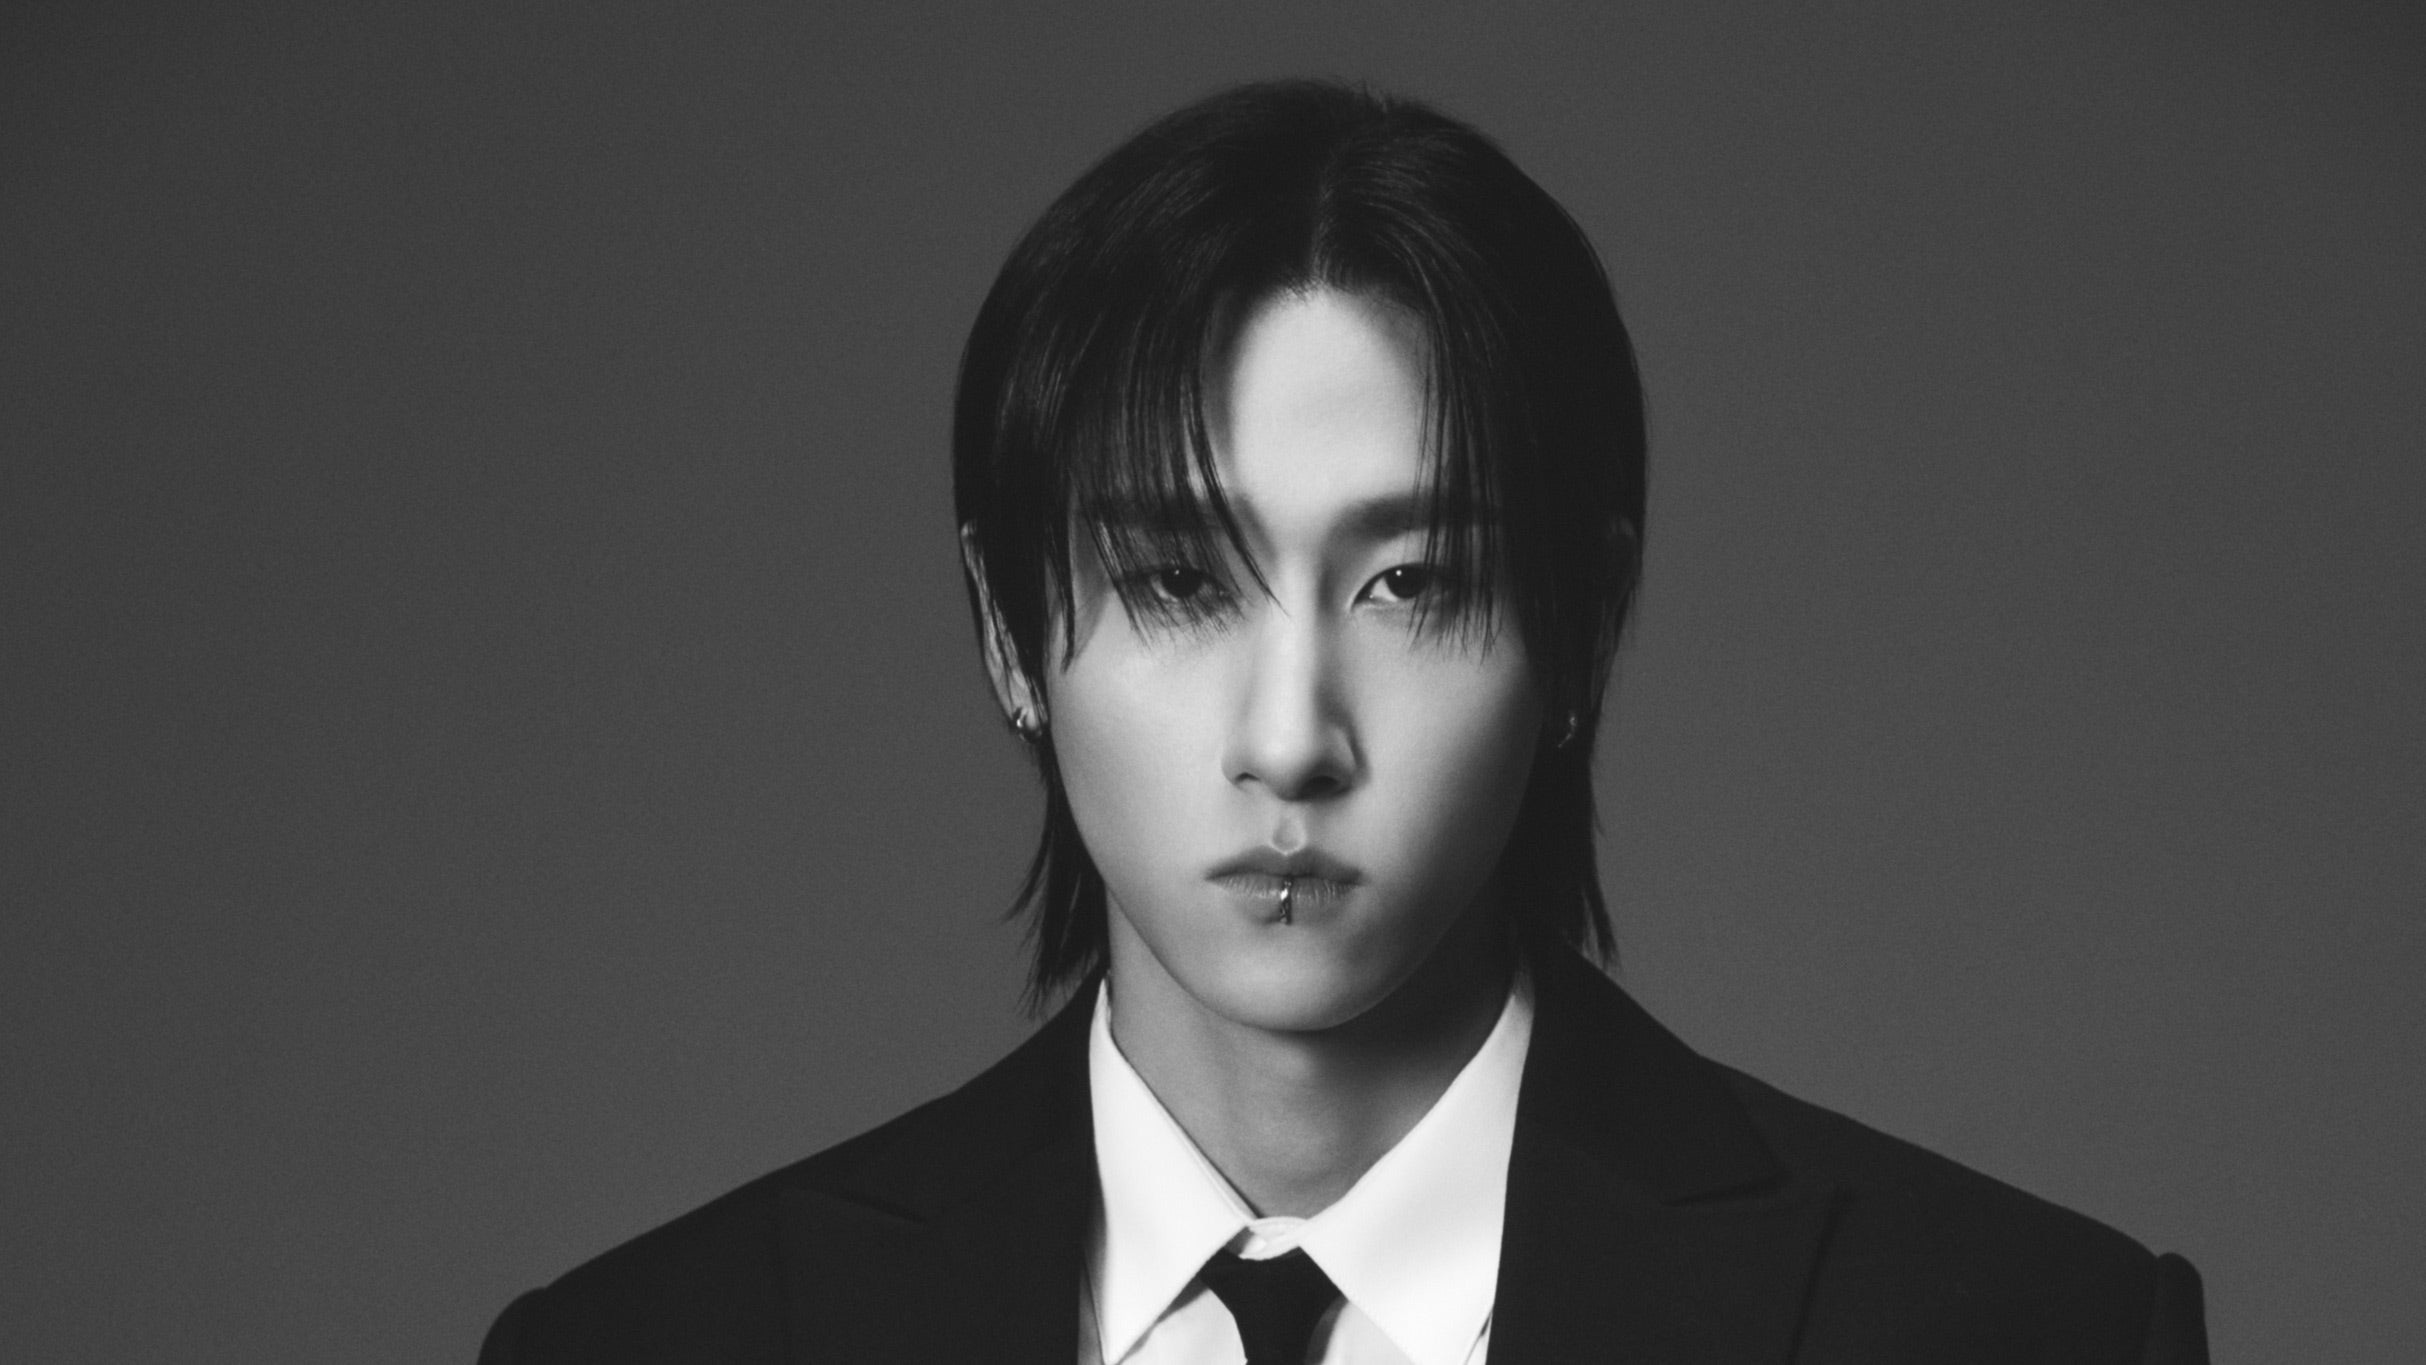 I.M (MONSTA X) - MOVED FROM IRVING PLAZA TO BROOKLYN PARAMOUNT presale information on freepresalepasswords.com